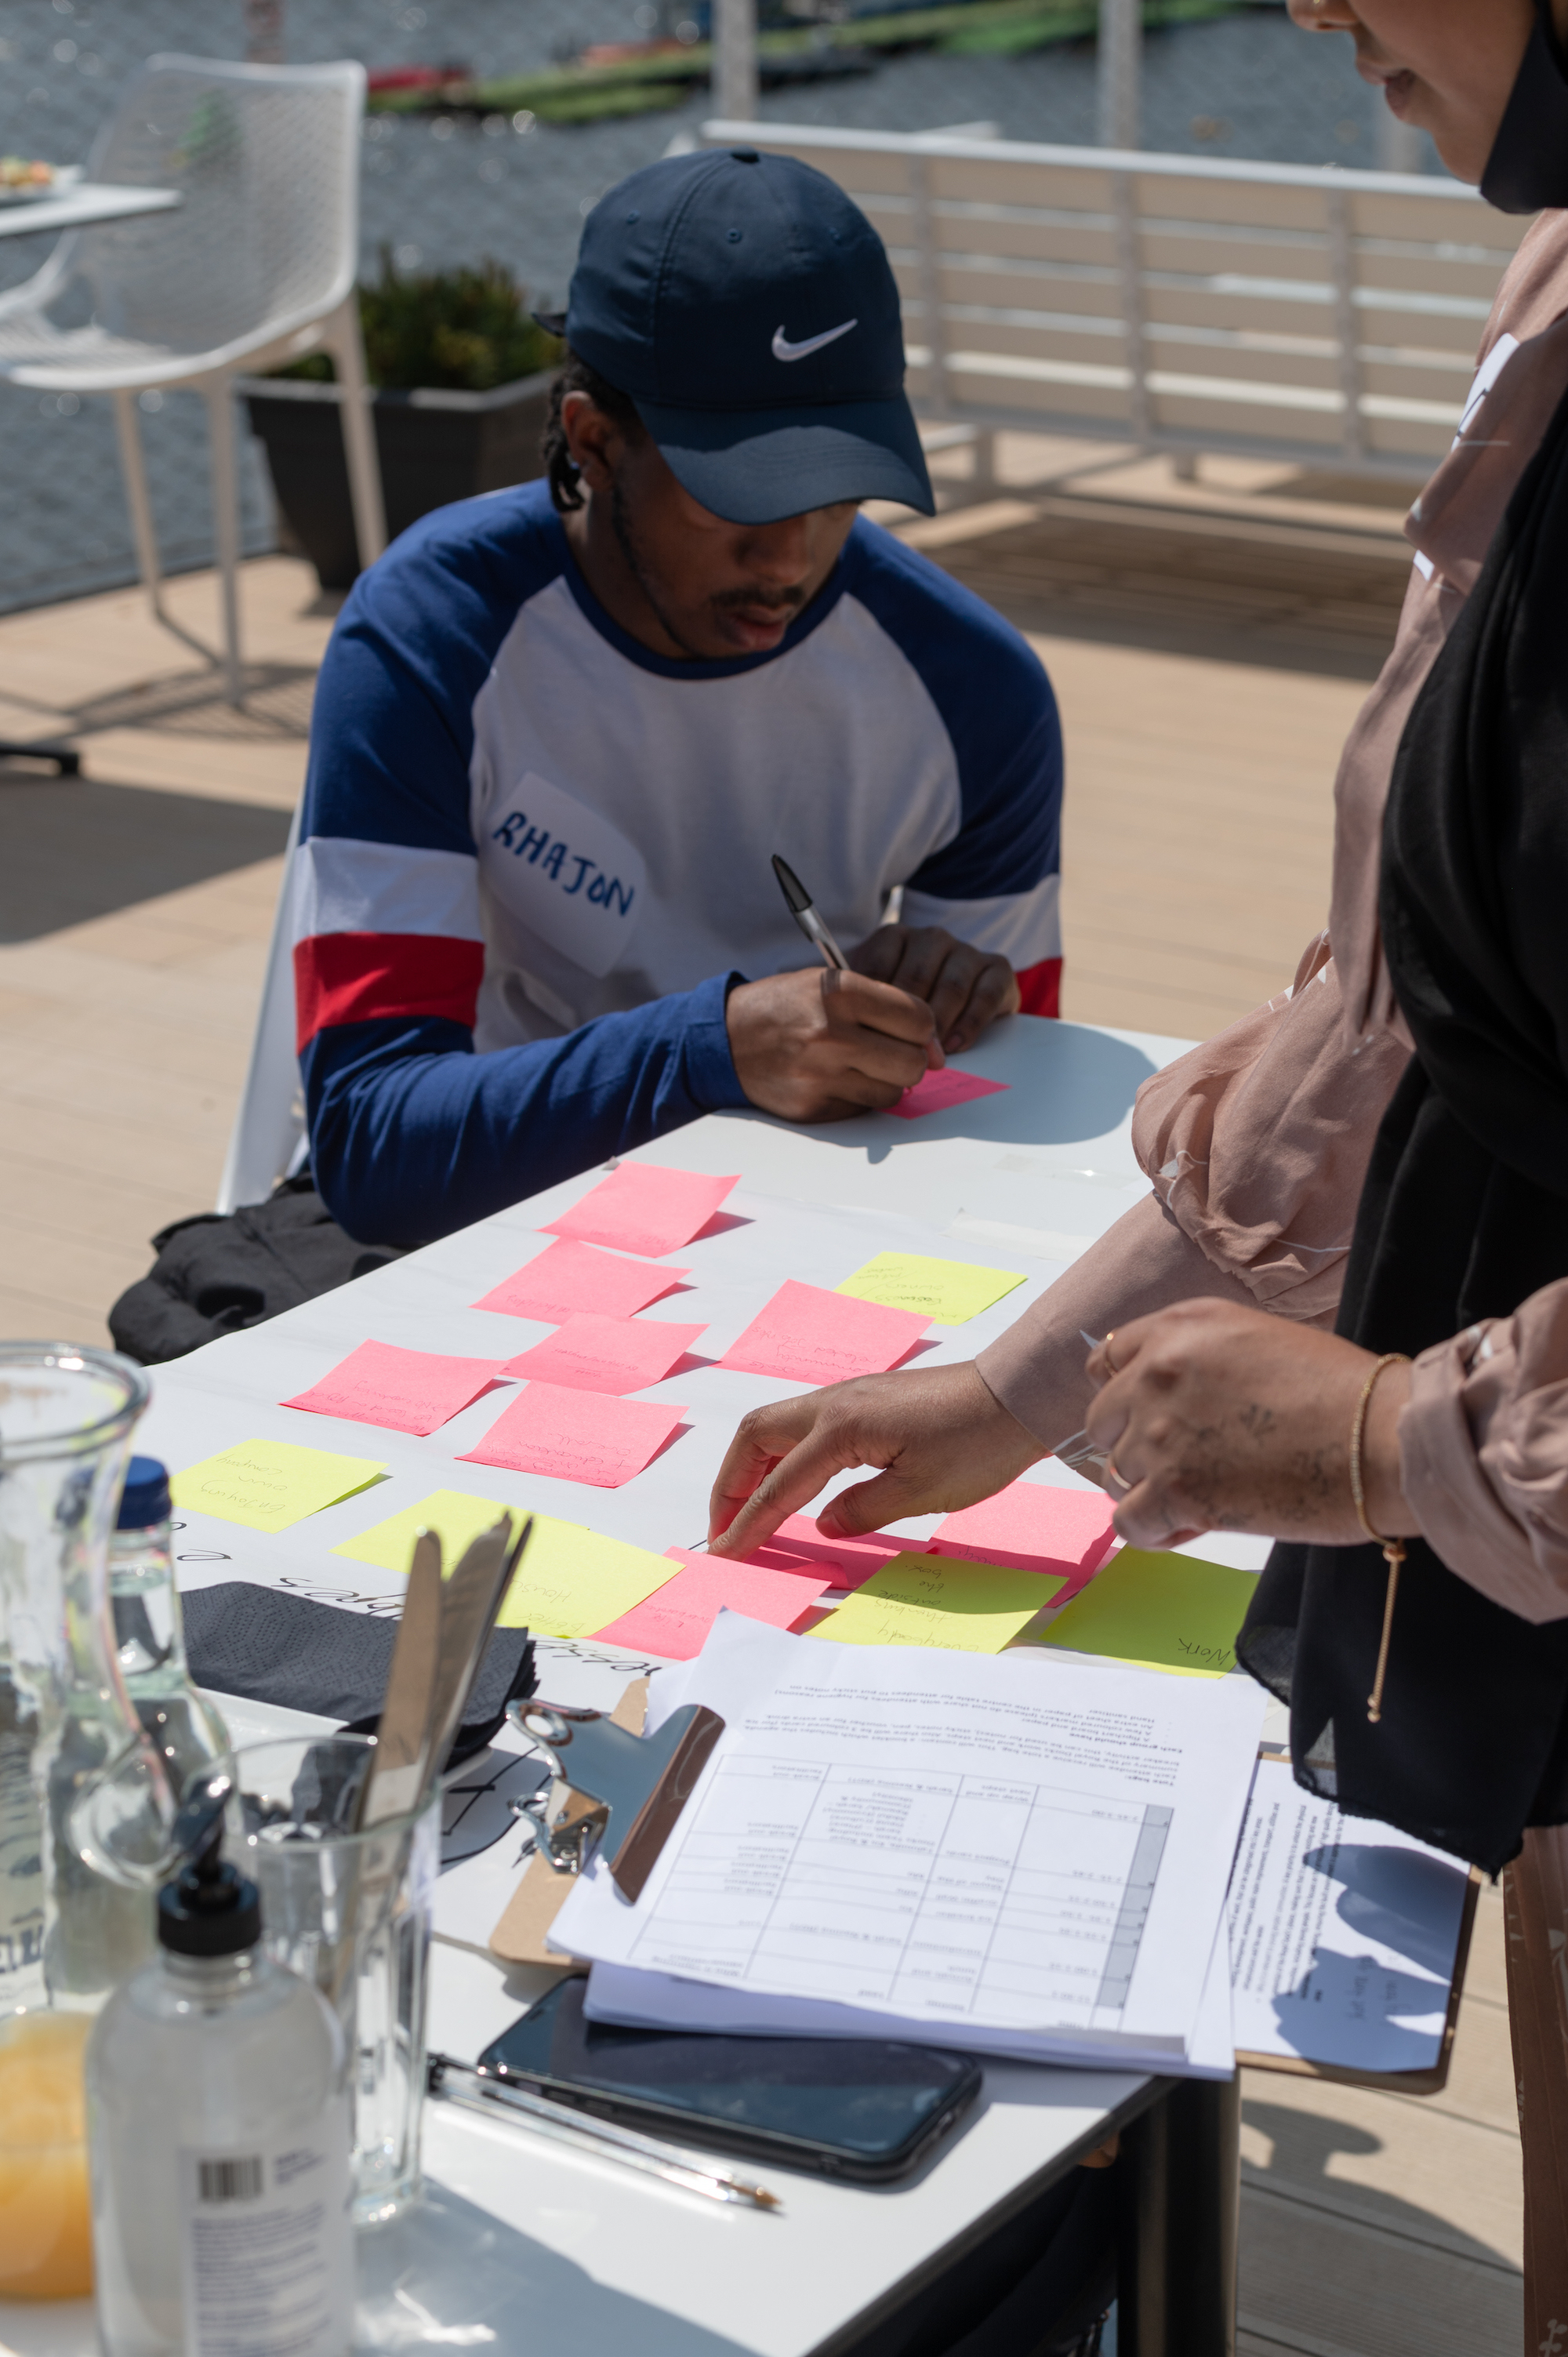 Young man in blue cap writing on postits during workshop